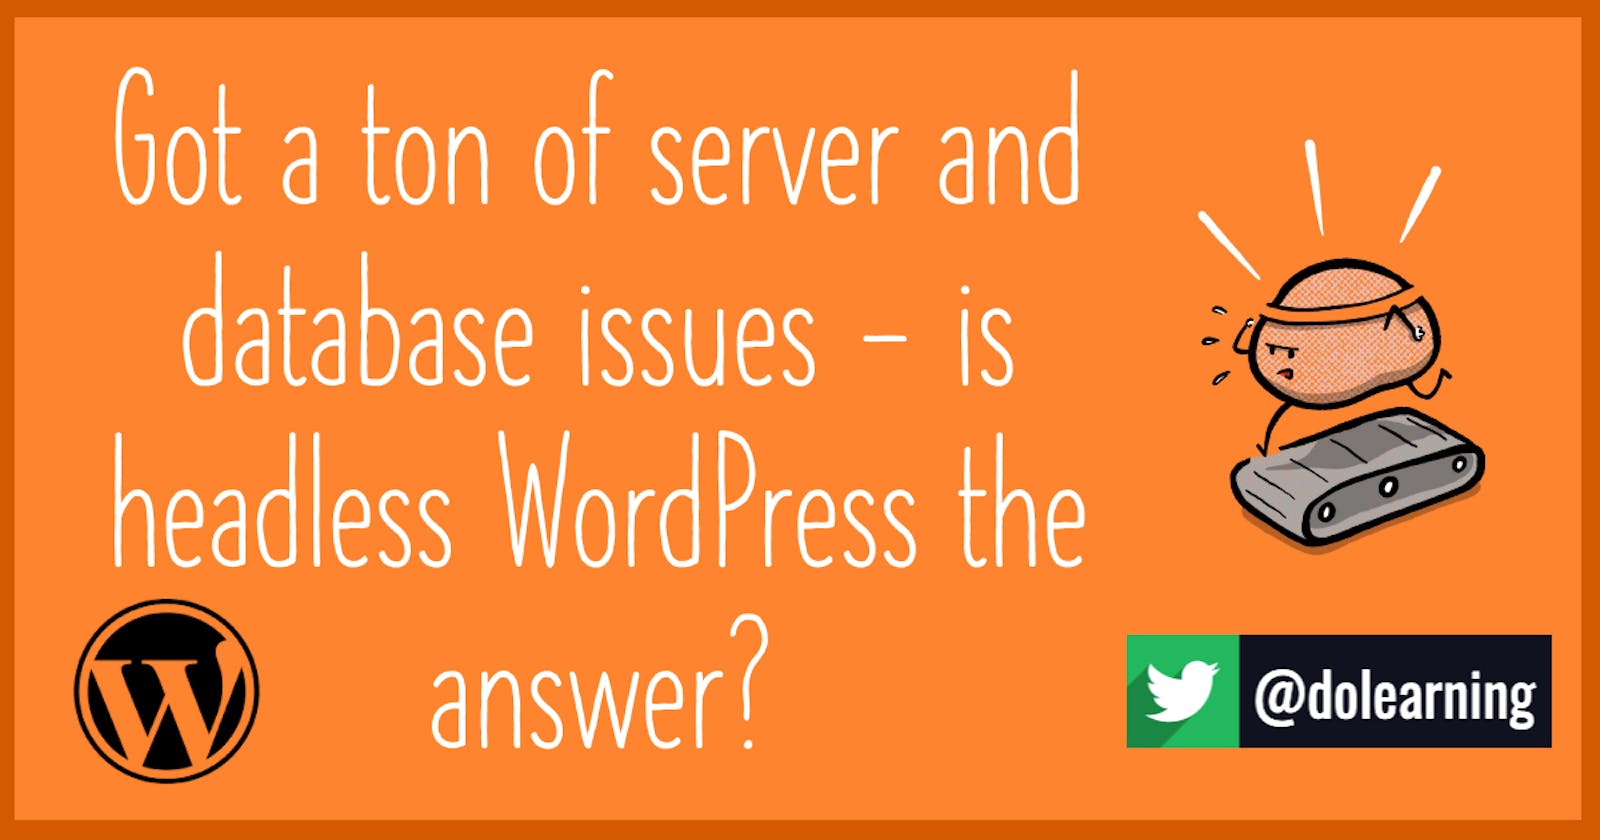 Got a ton of server and database issues - is headless WordPress the answer?